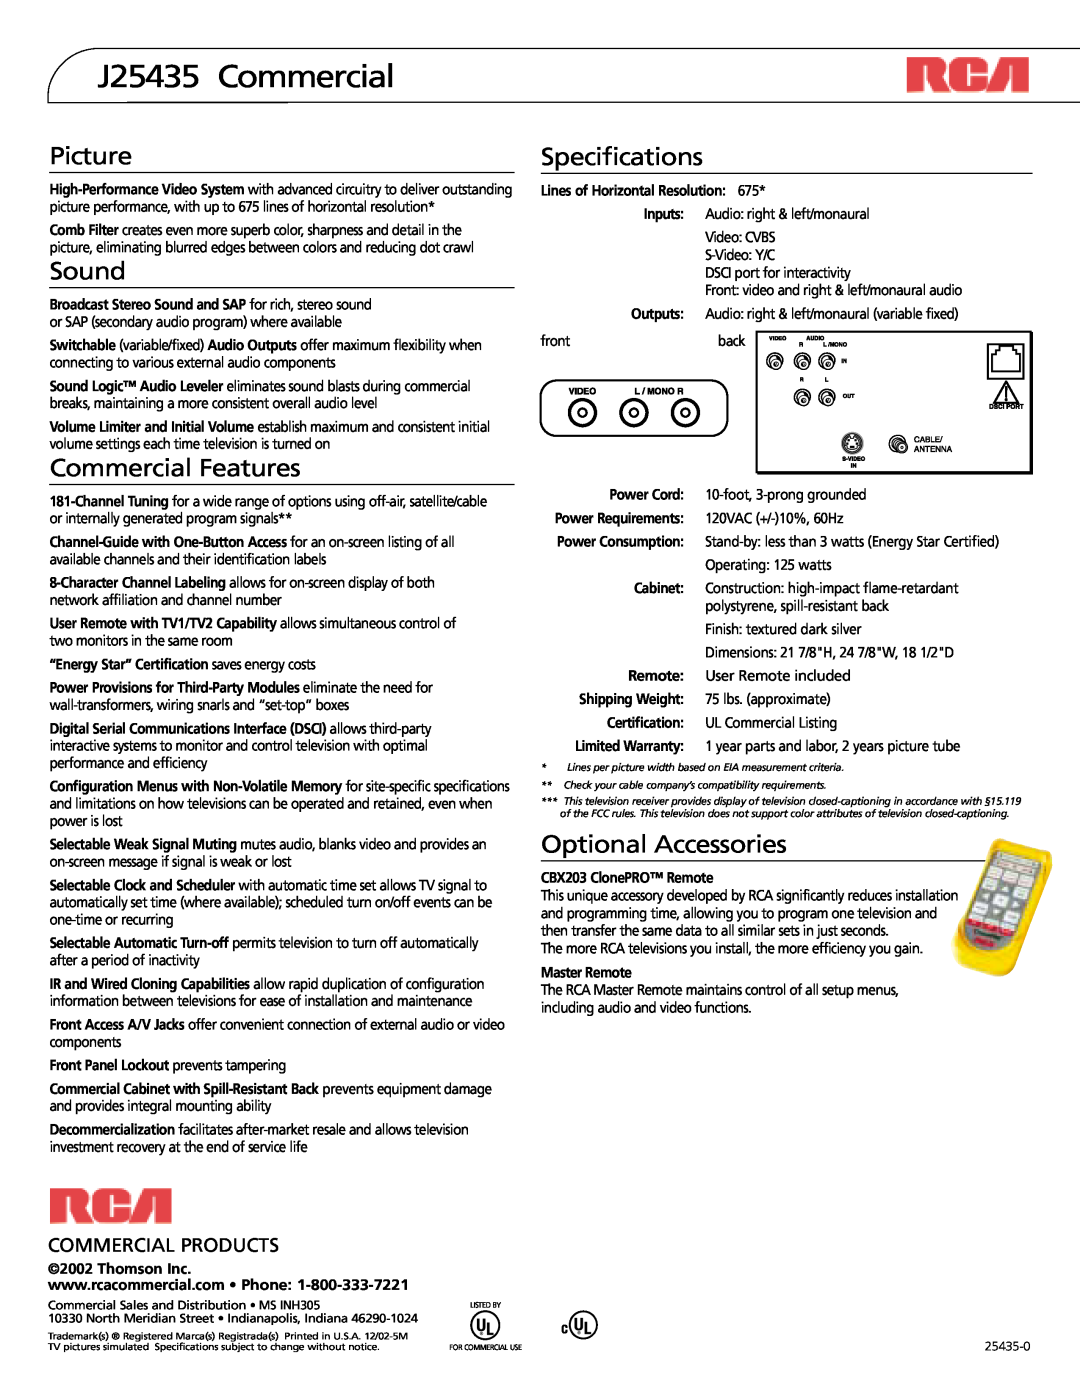 RCA J25435 Commercial, Picture, Sound, Commercial Features, Specifications, Optional Accessories, Commercial Products 